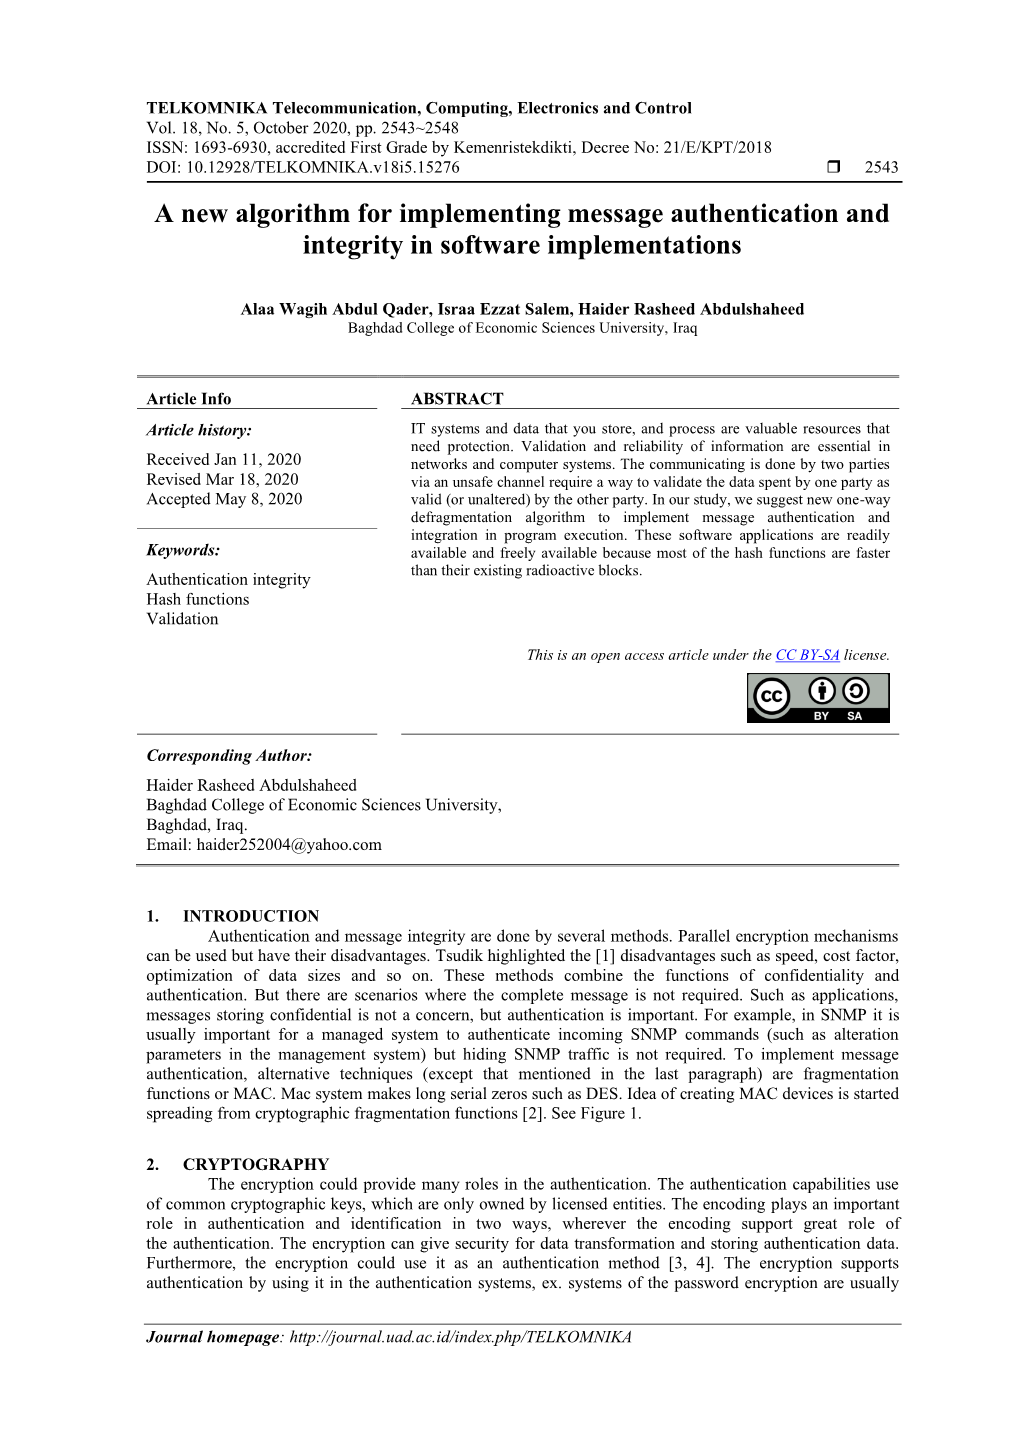 A New Algorithm for Implementing Message Authentication and Integrity in Software Implementations